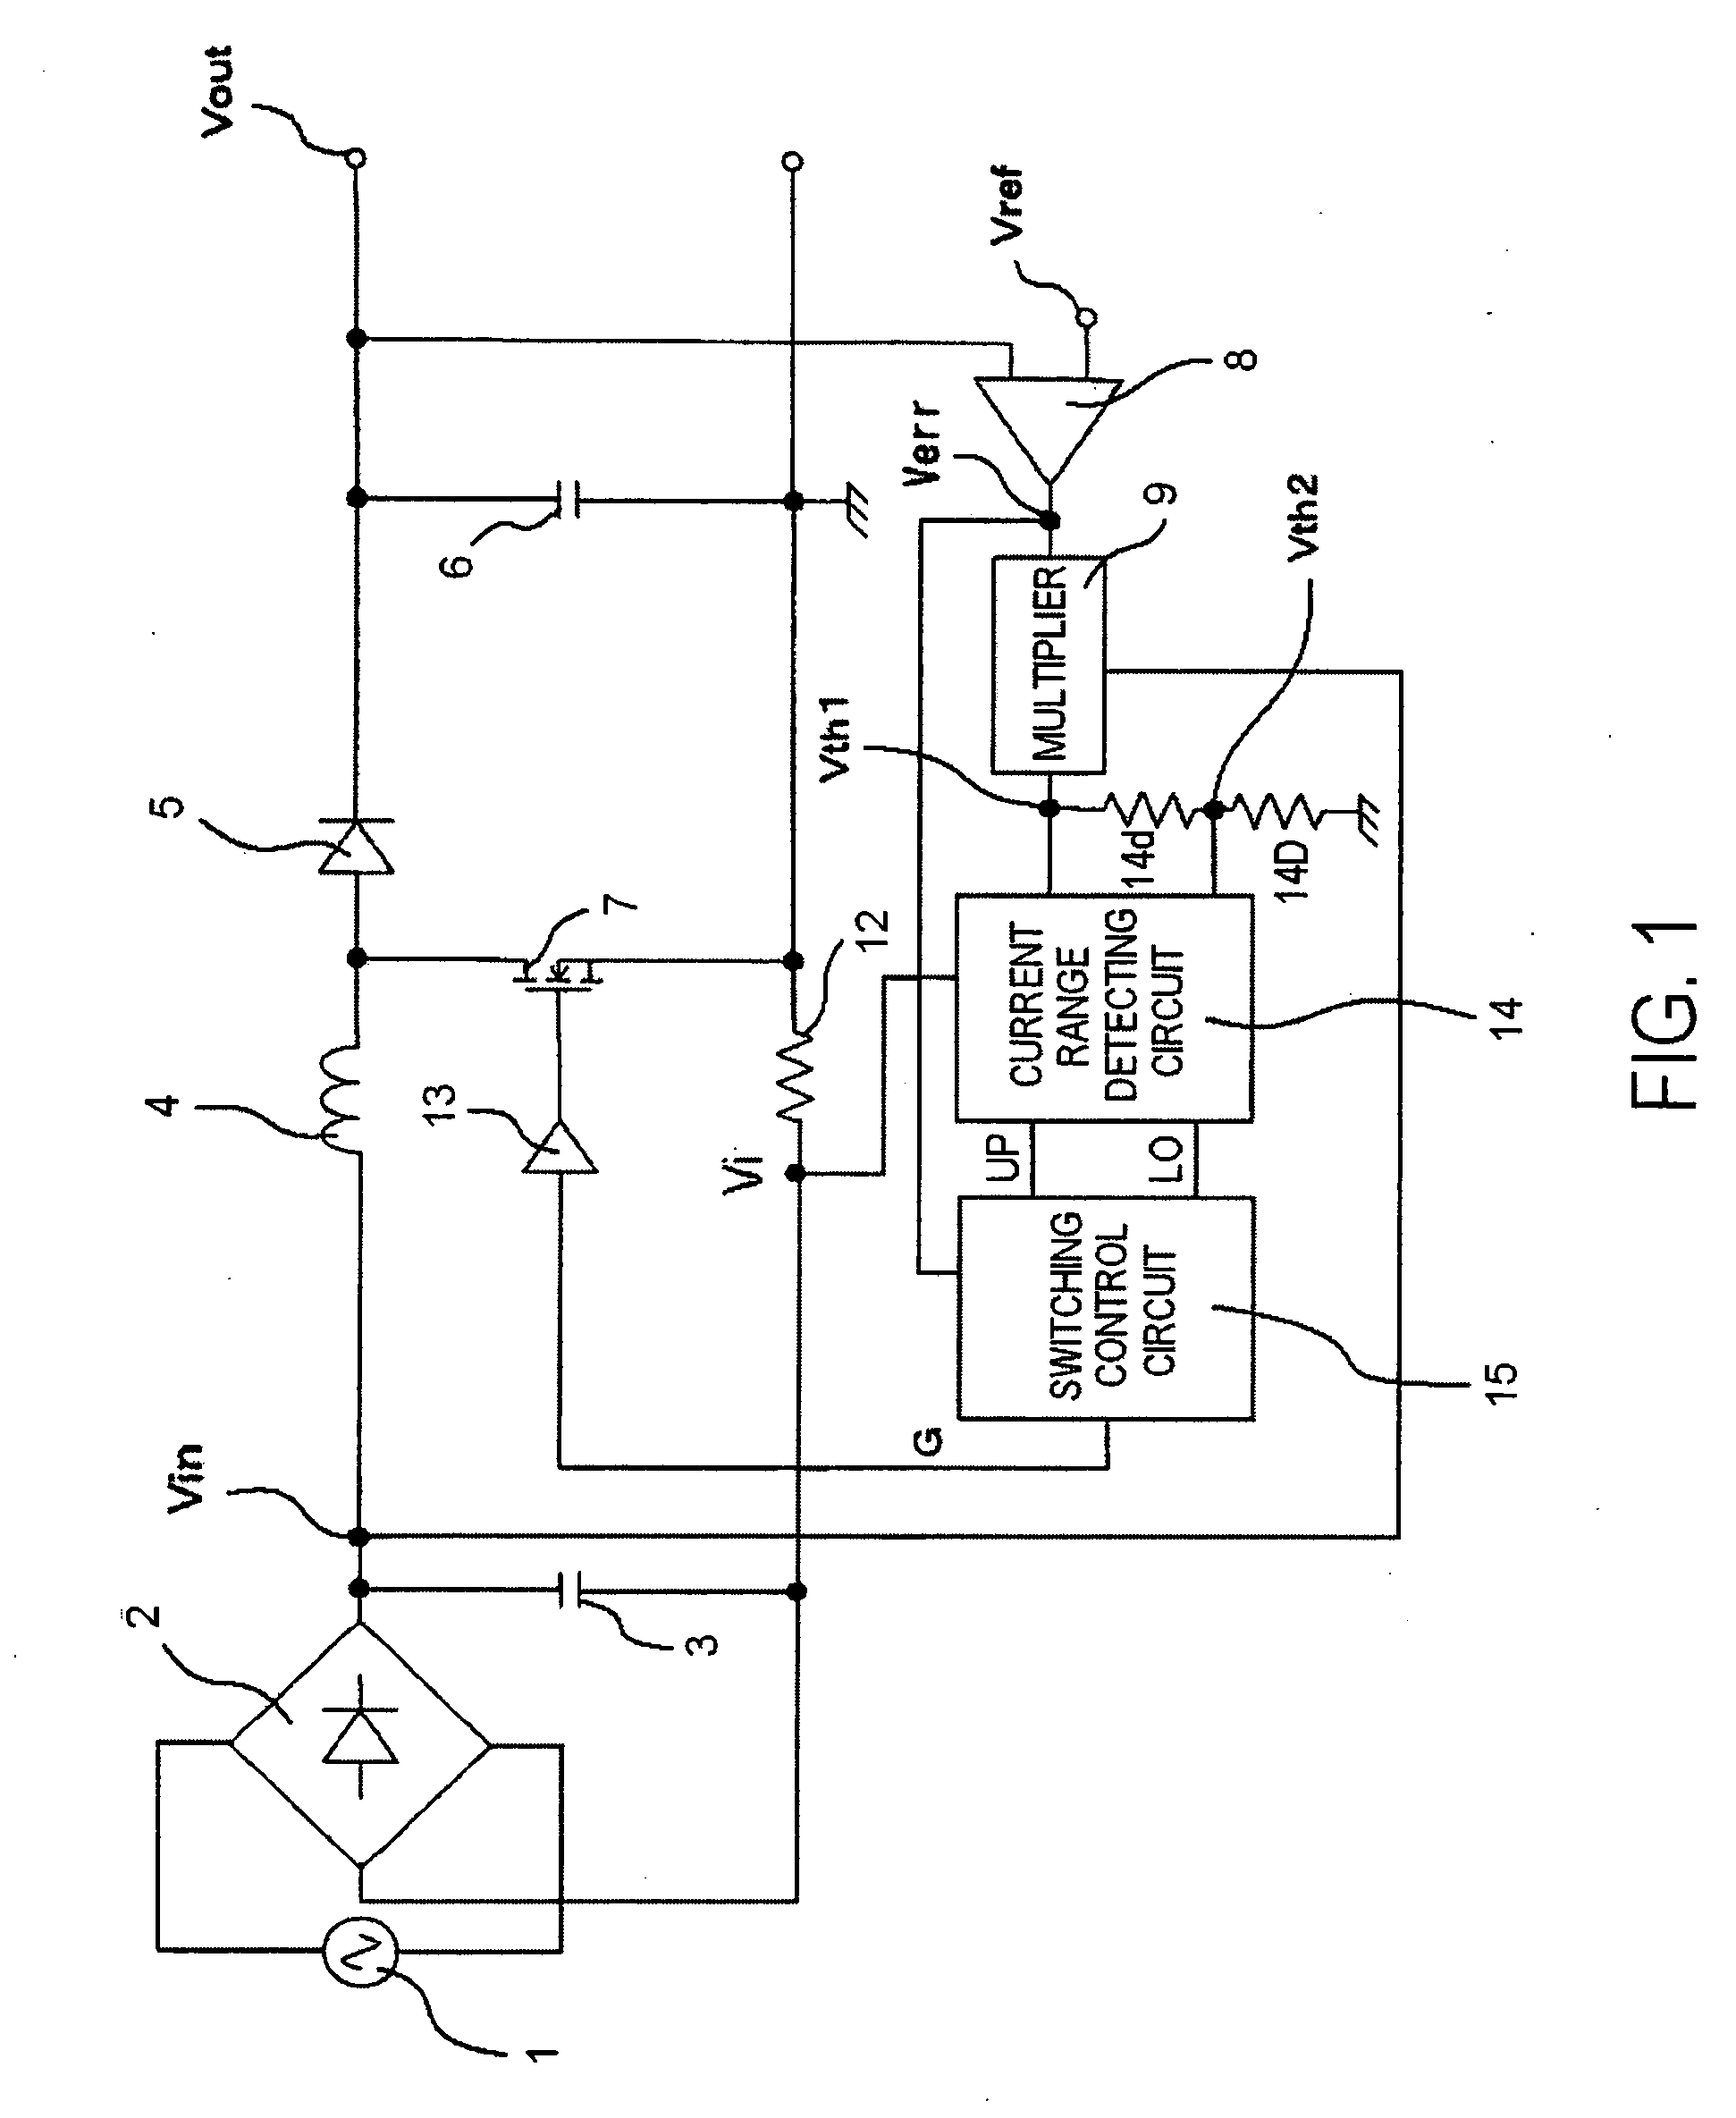 Switching power source system